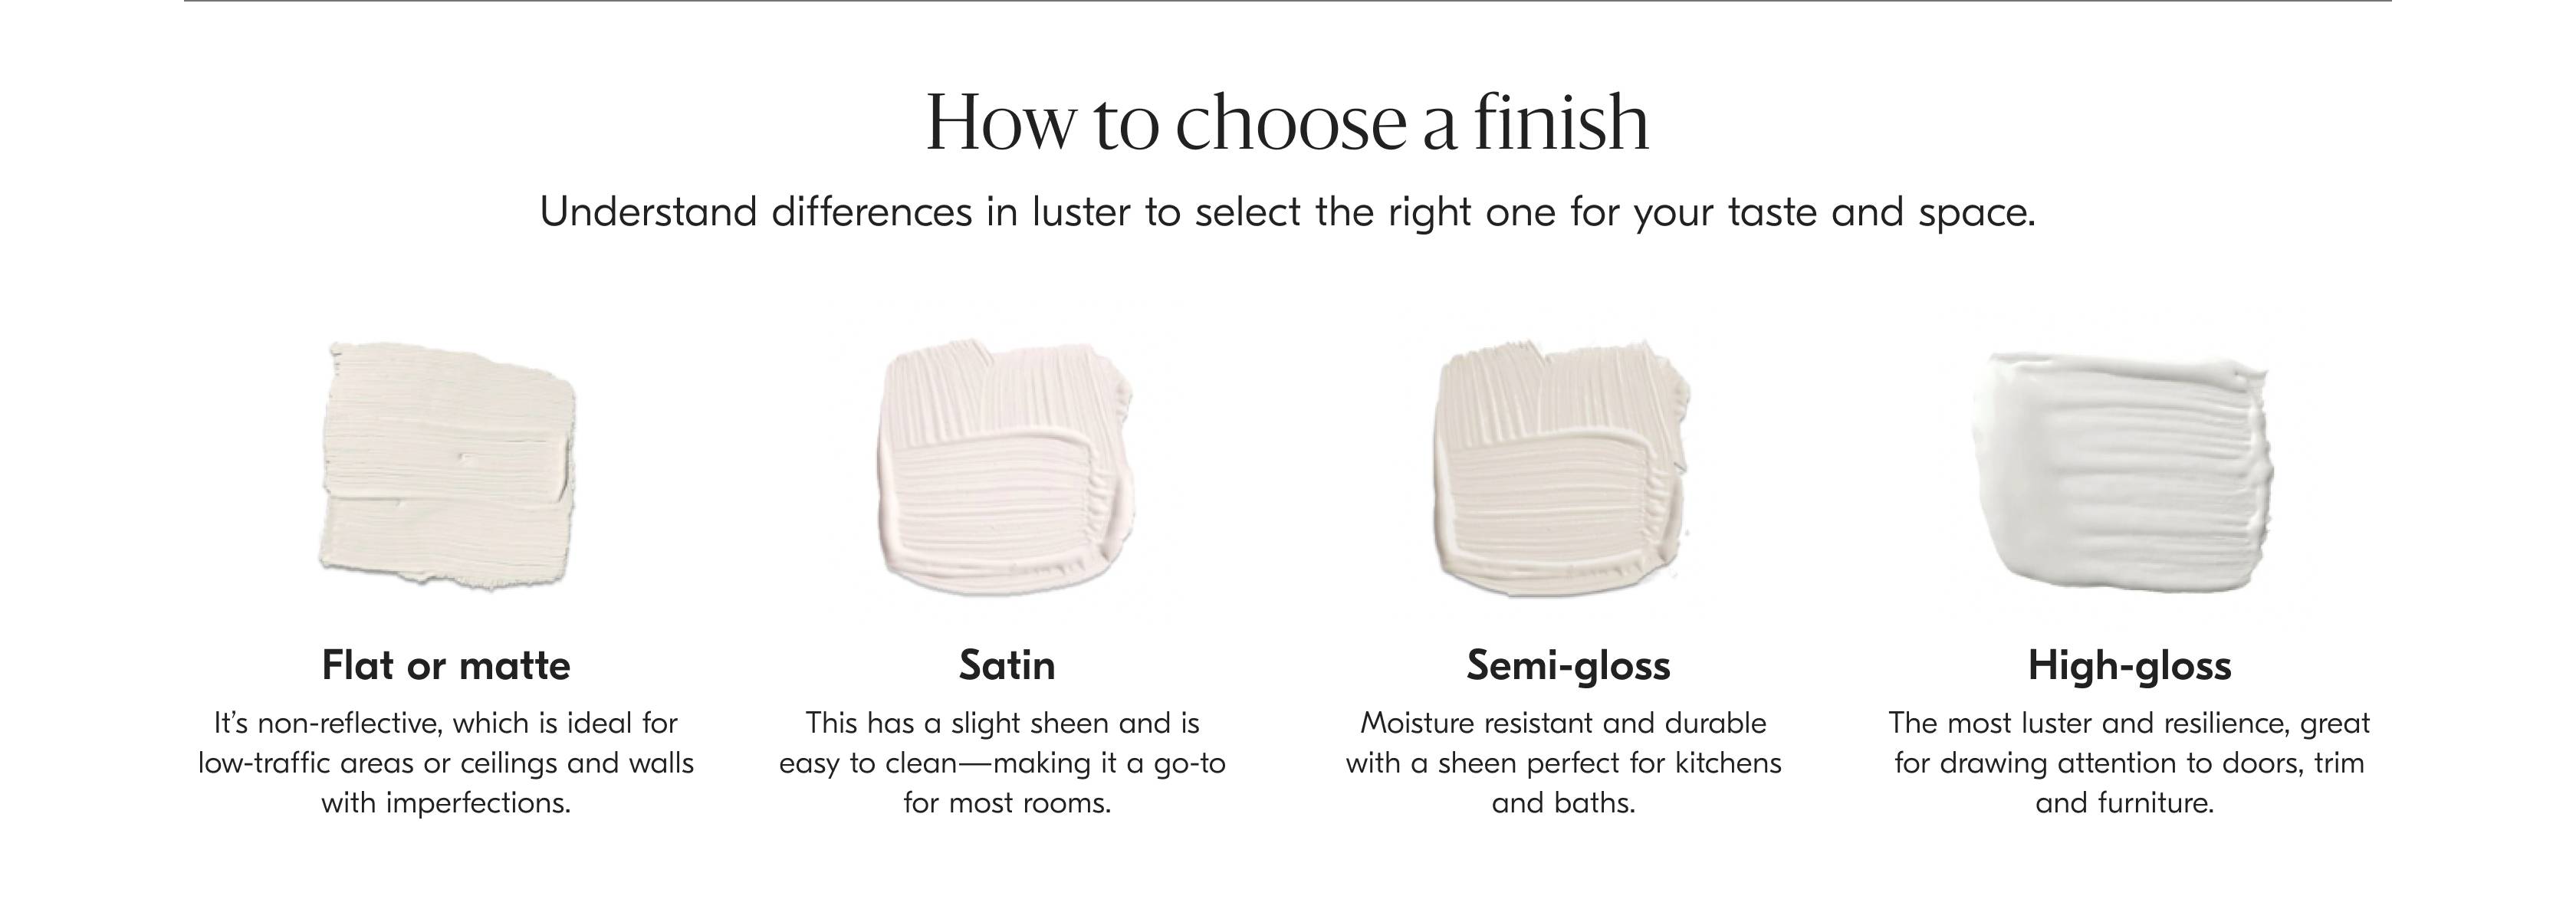 How to choose a finish